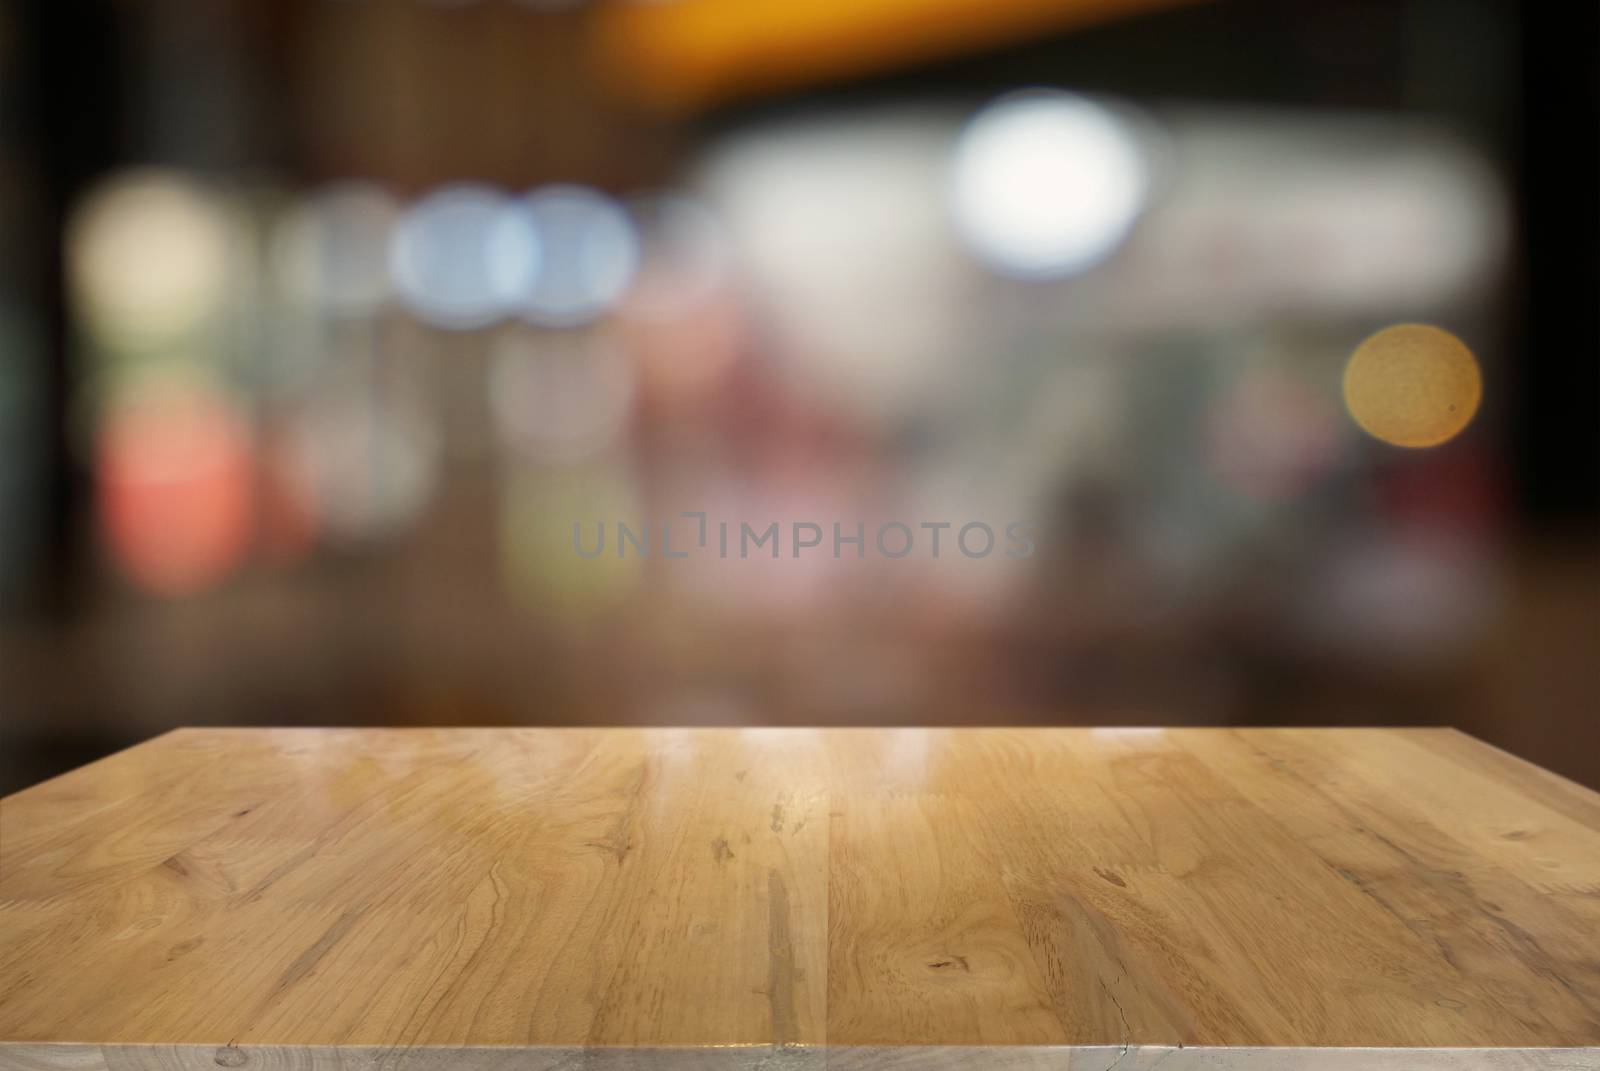 Empty dark wooden table in front of abstract blurred background  by peandben